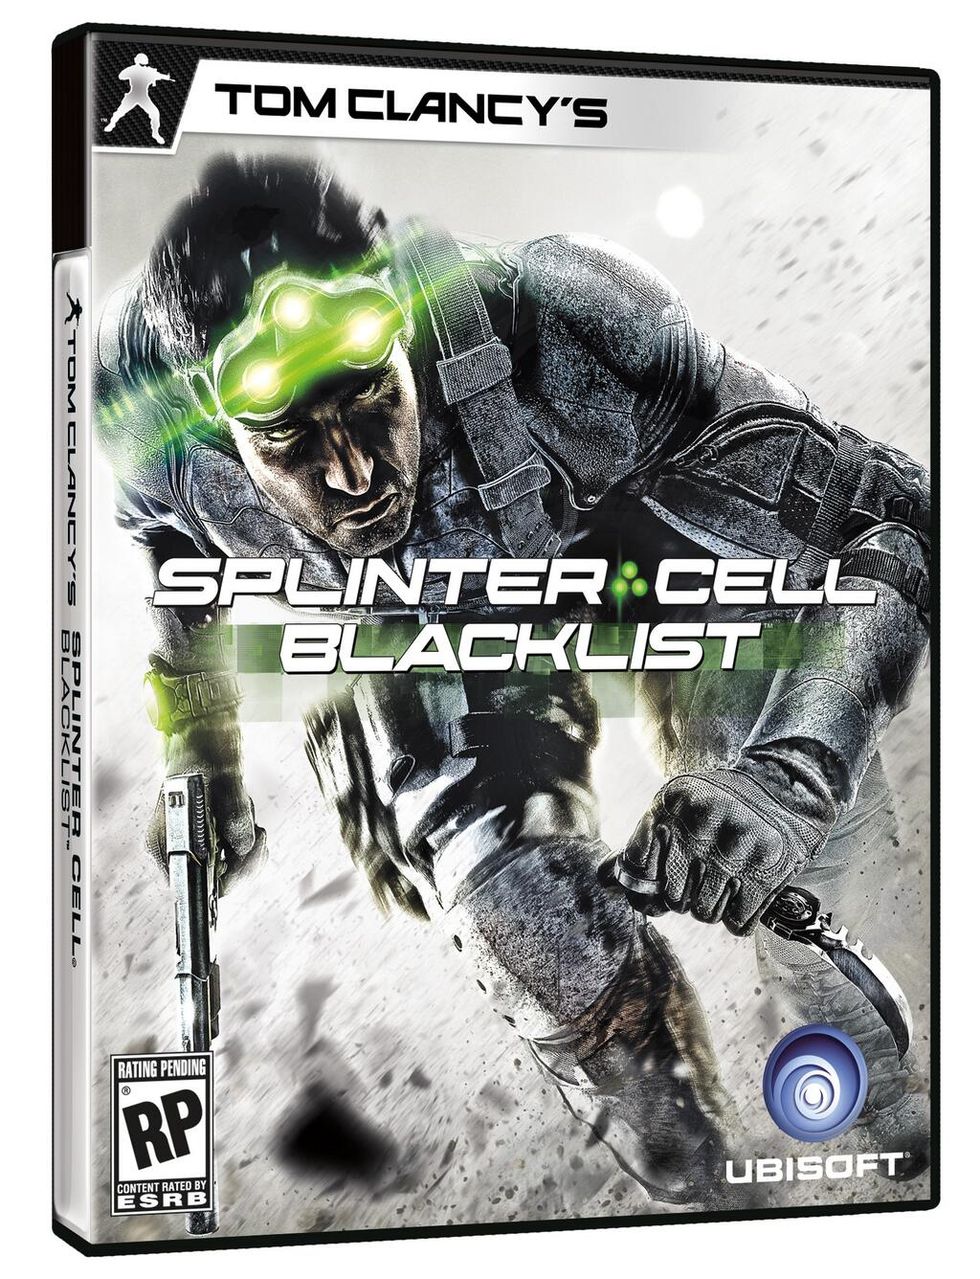 Netflix's Splinter Cell TV Series Revealed From The Creator Of